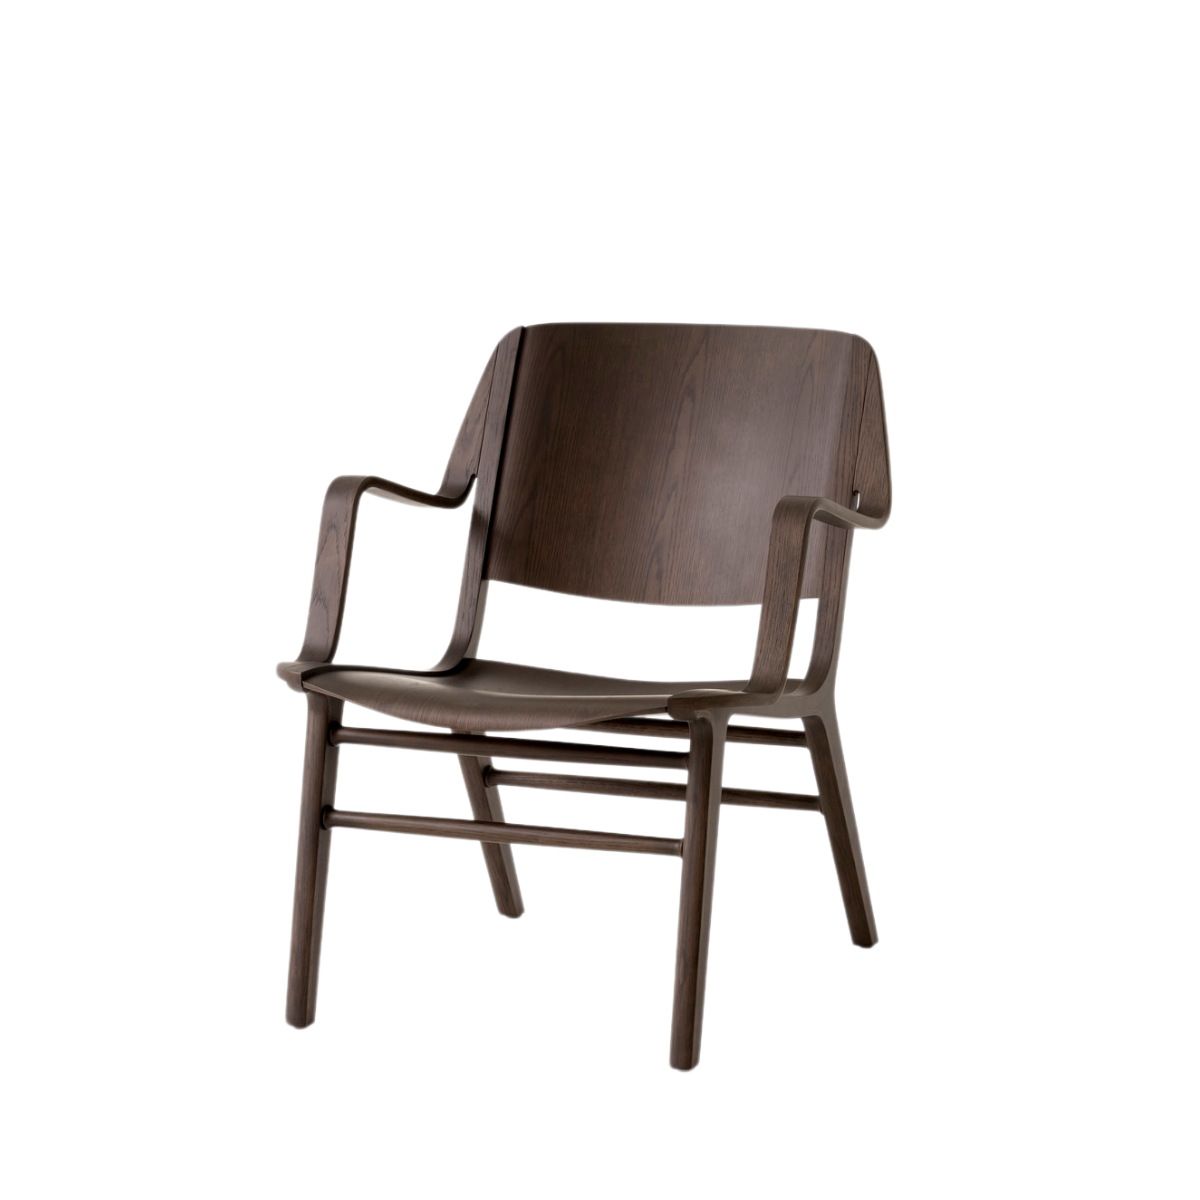 &Tradition | AX Lounge Chair HM11